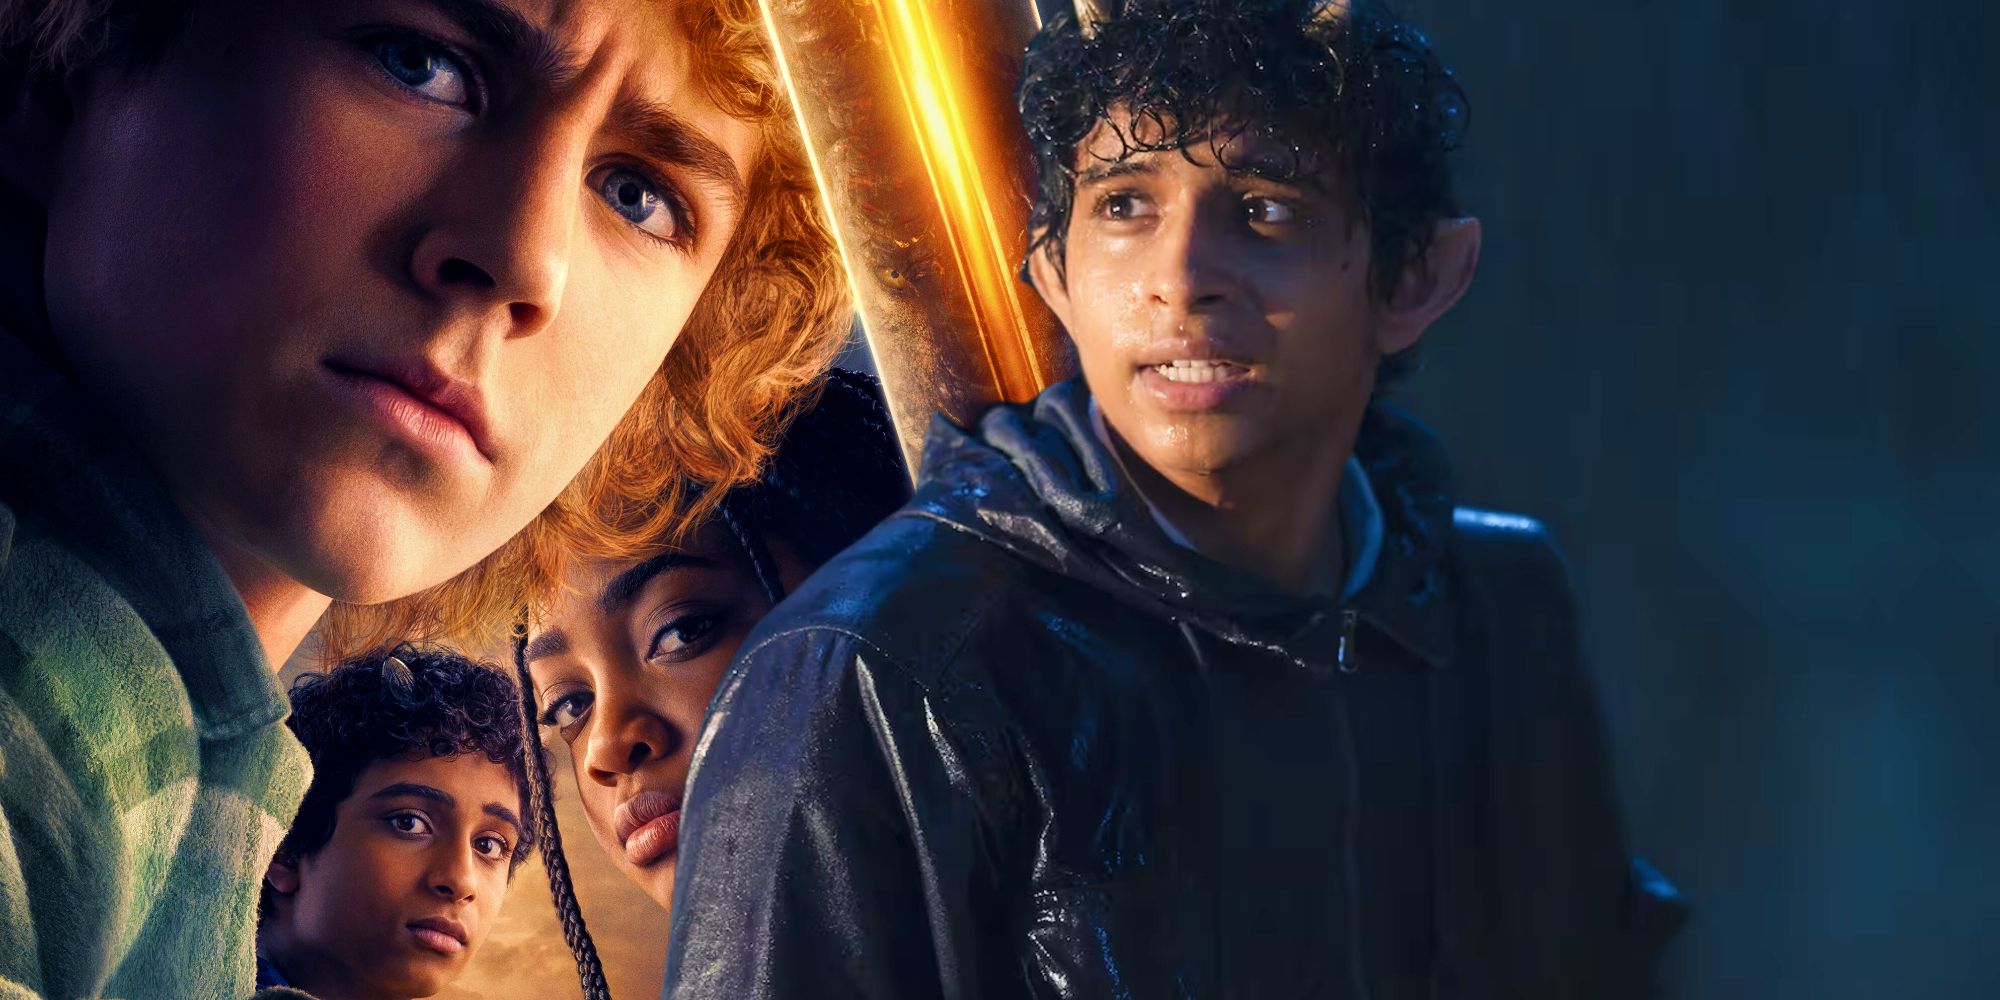 The poster for Percy Jackson season 1 next to Grover standing in the rain